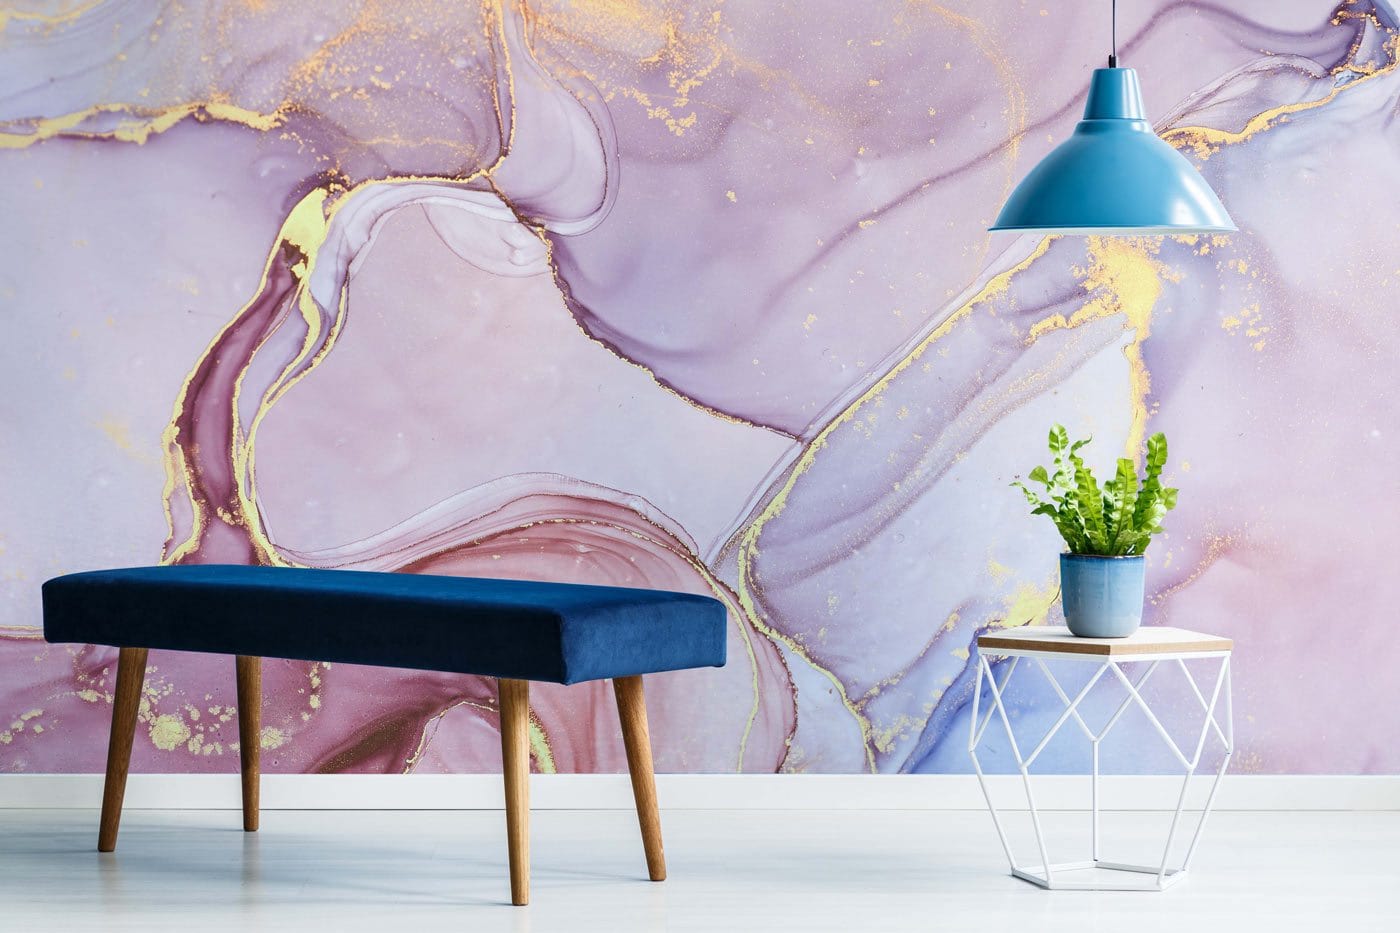 Wallpaper Mural of Melting Pinky Marble for the Hallway